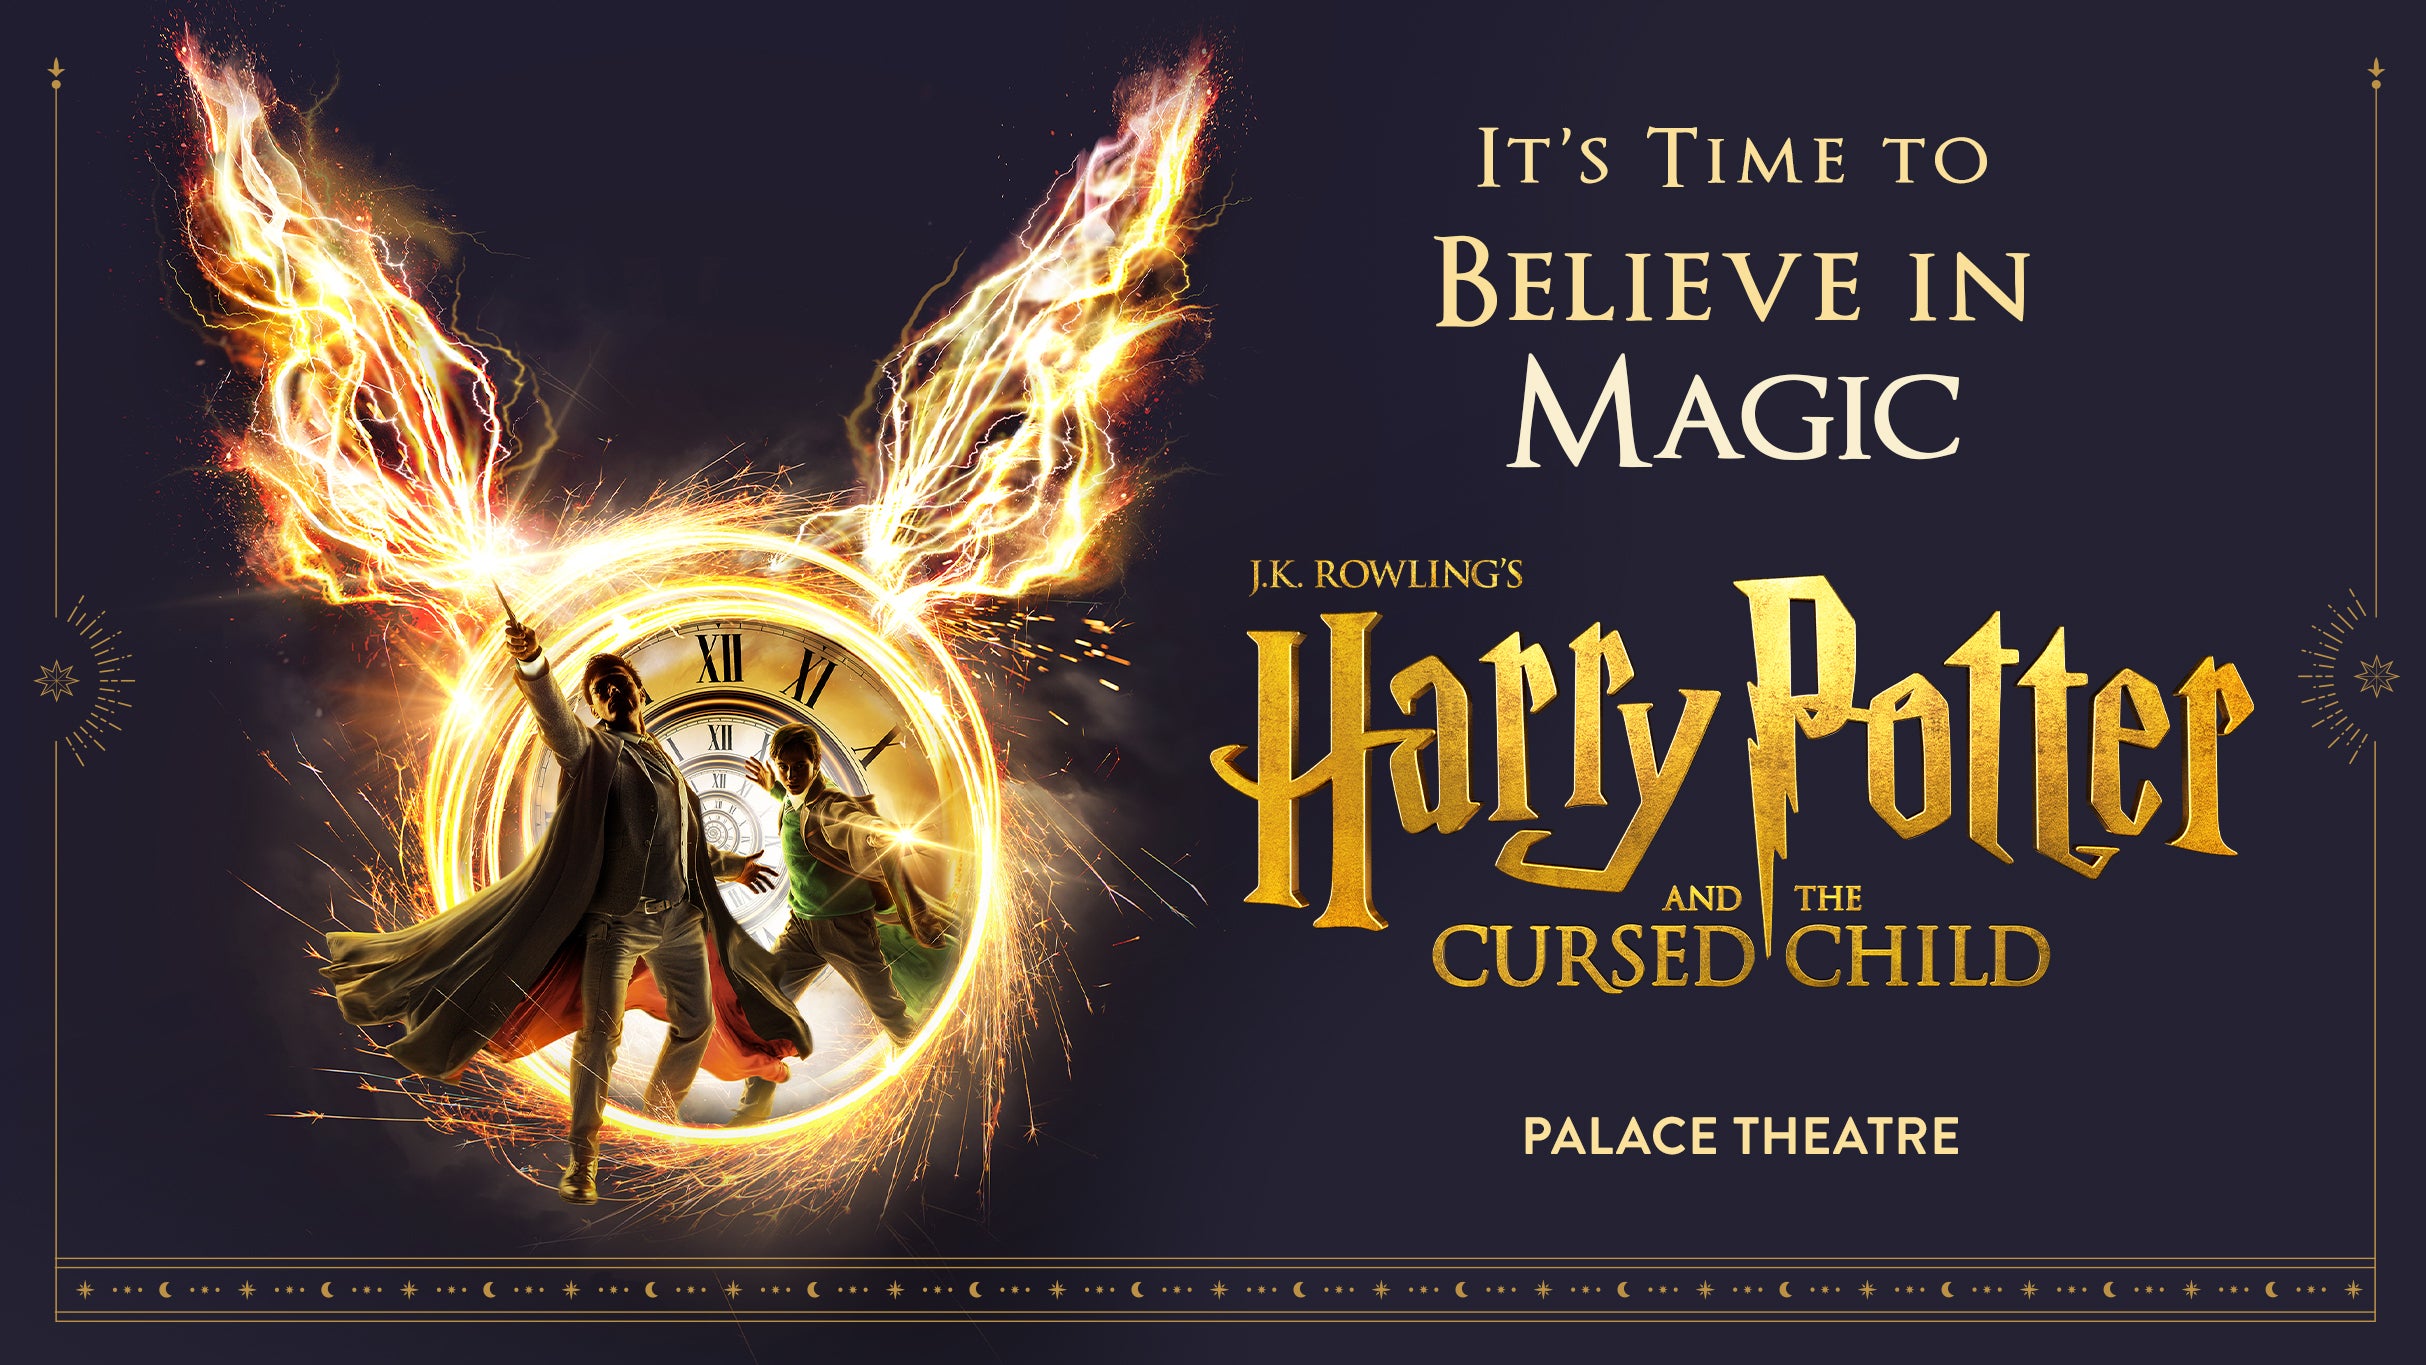 Harry Potter and the Cursed Child - Parts 1 & 2 Wed 14:00 & 19:00